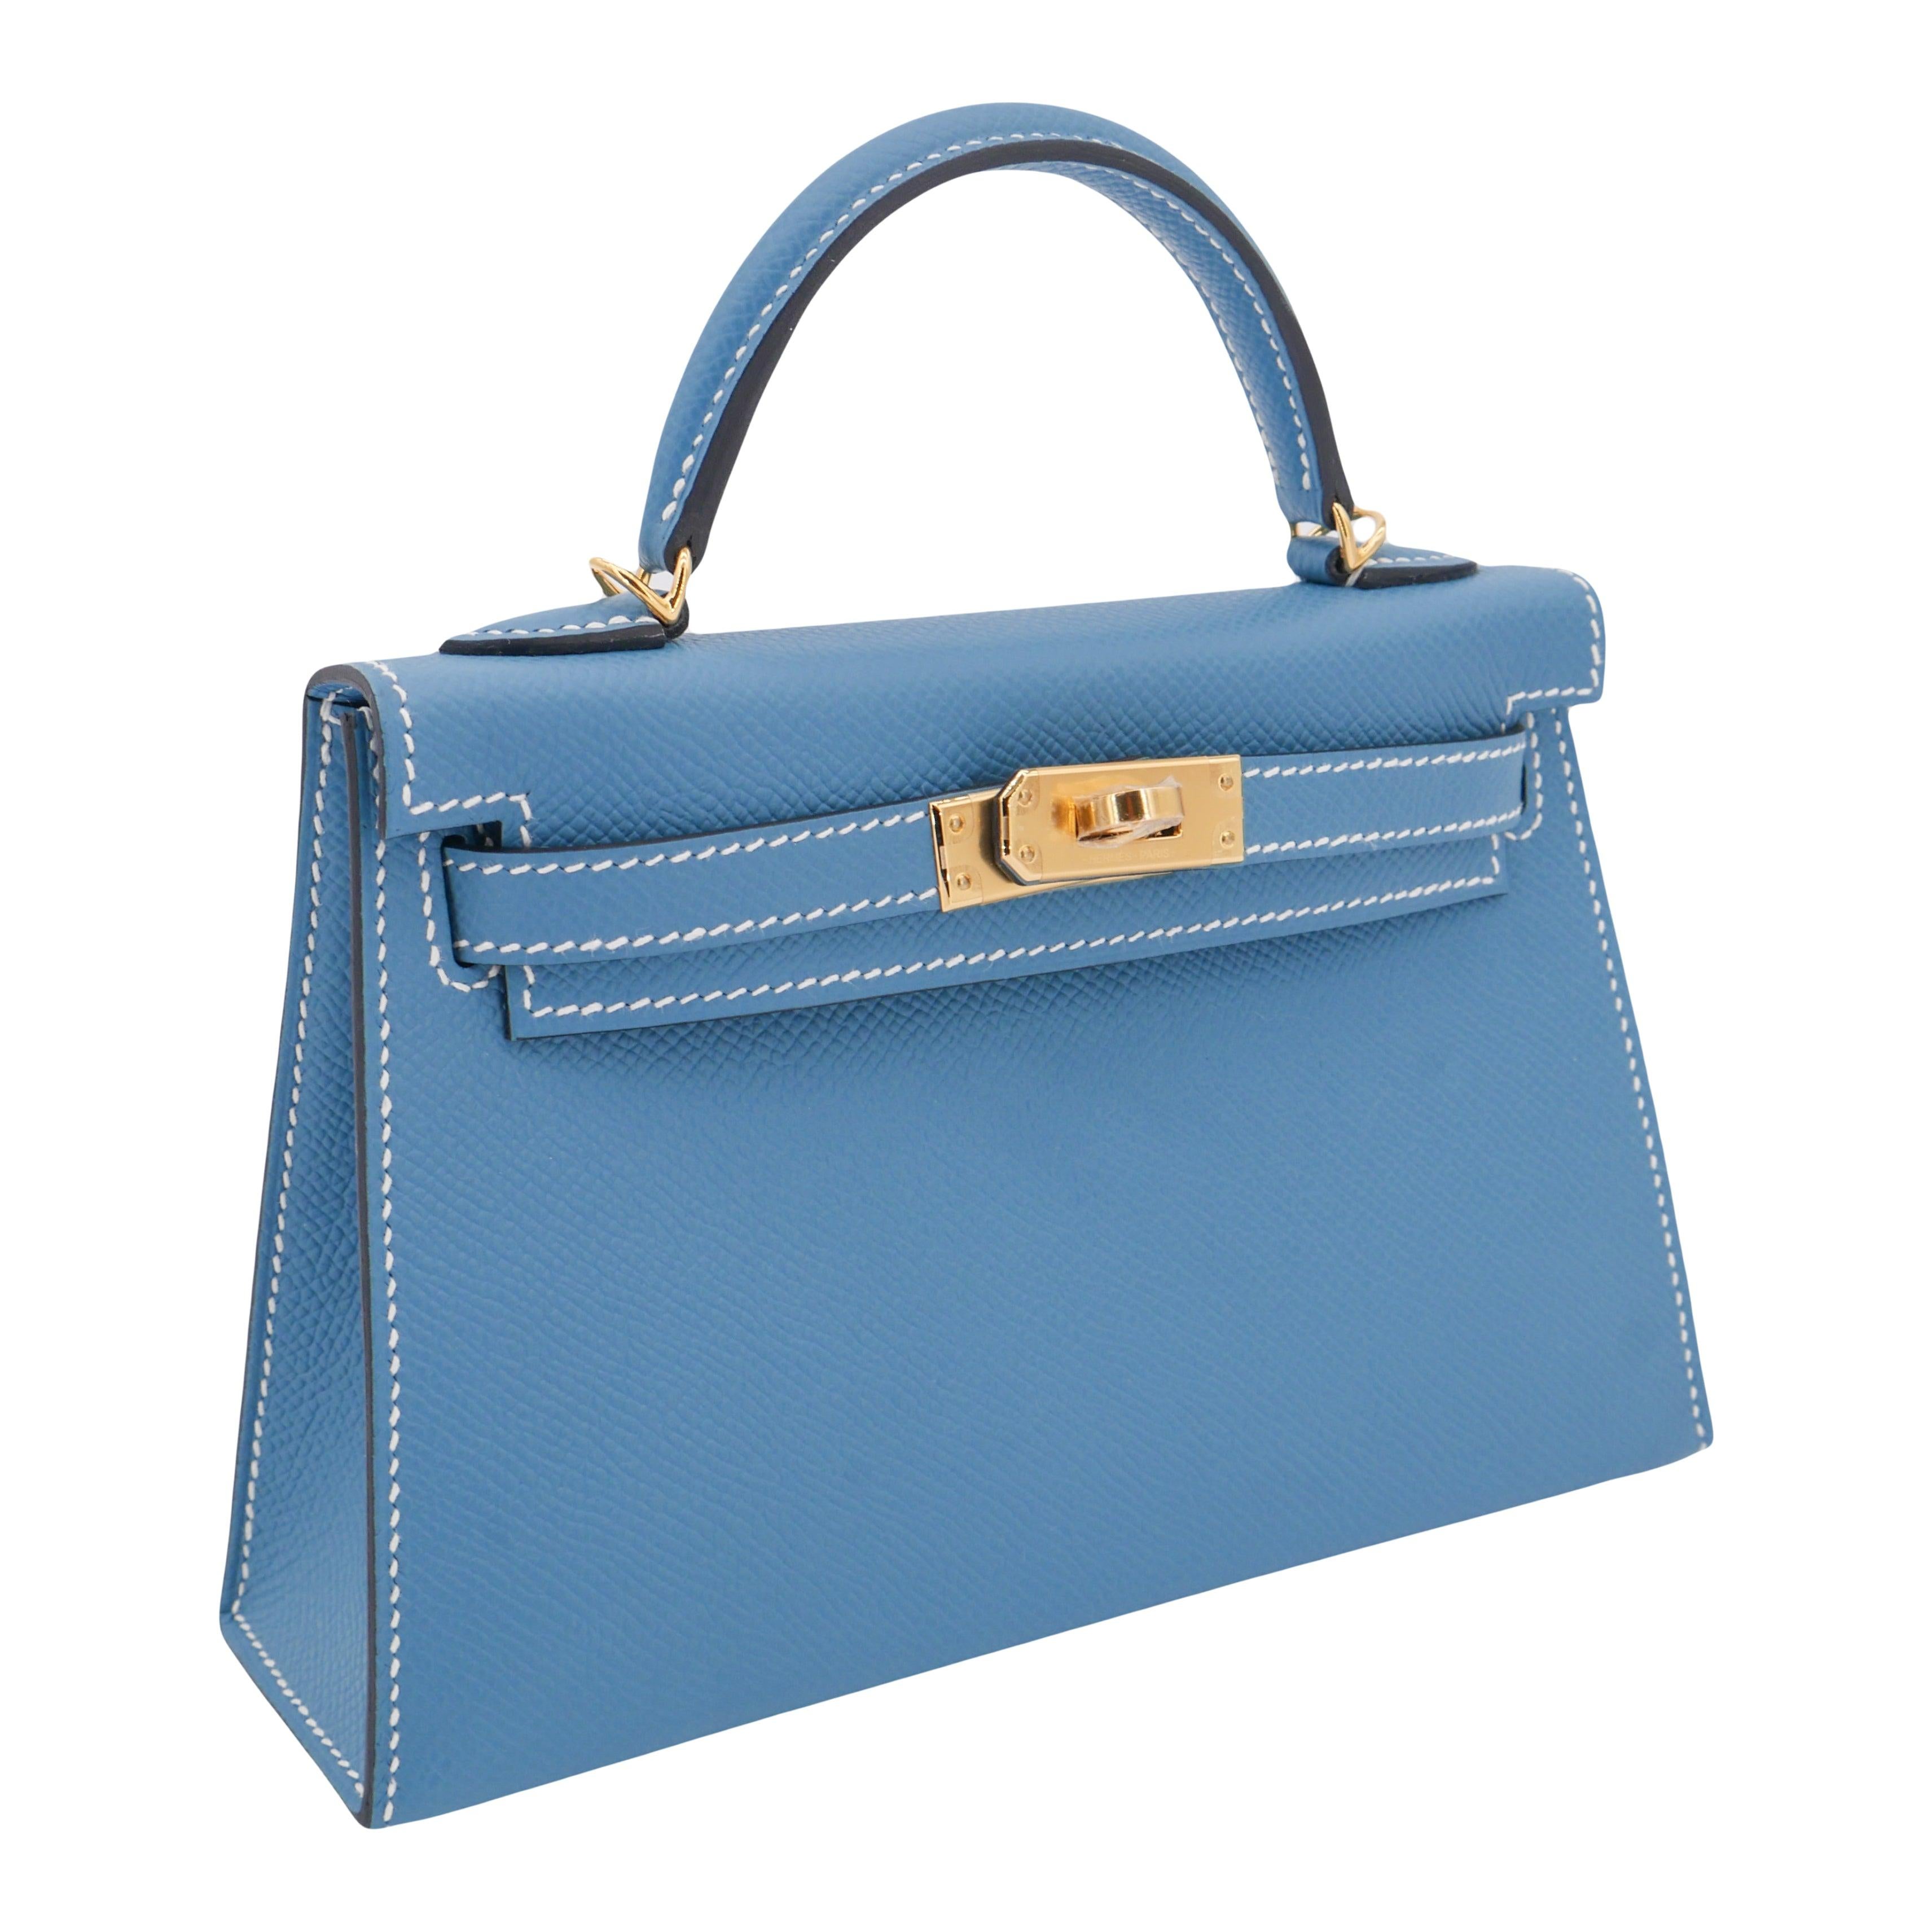 Brand: Hermès
Style: Kelly II Sellier Mini
Size: 20cm
Color: Bleu Jean
Material: Epsom Leather
Hardware: Gold Hardware(GHW)
Dimensions: 7.5